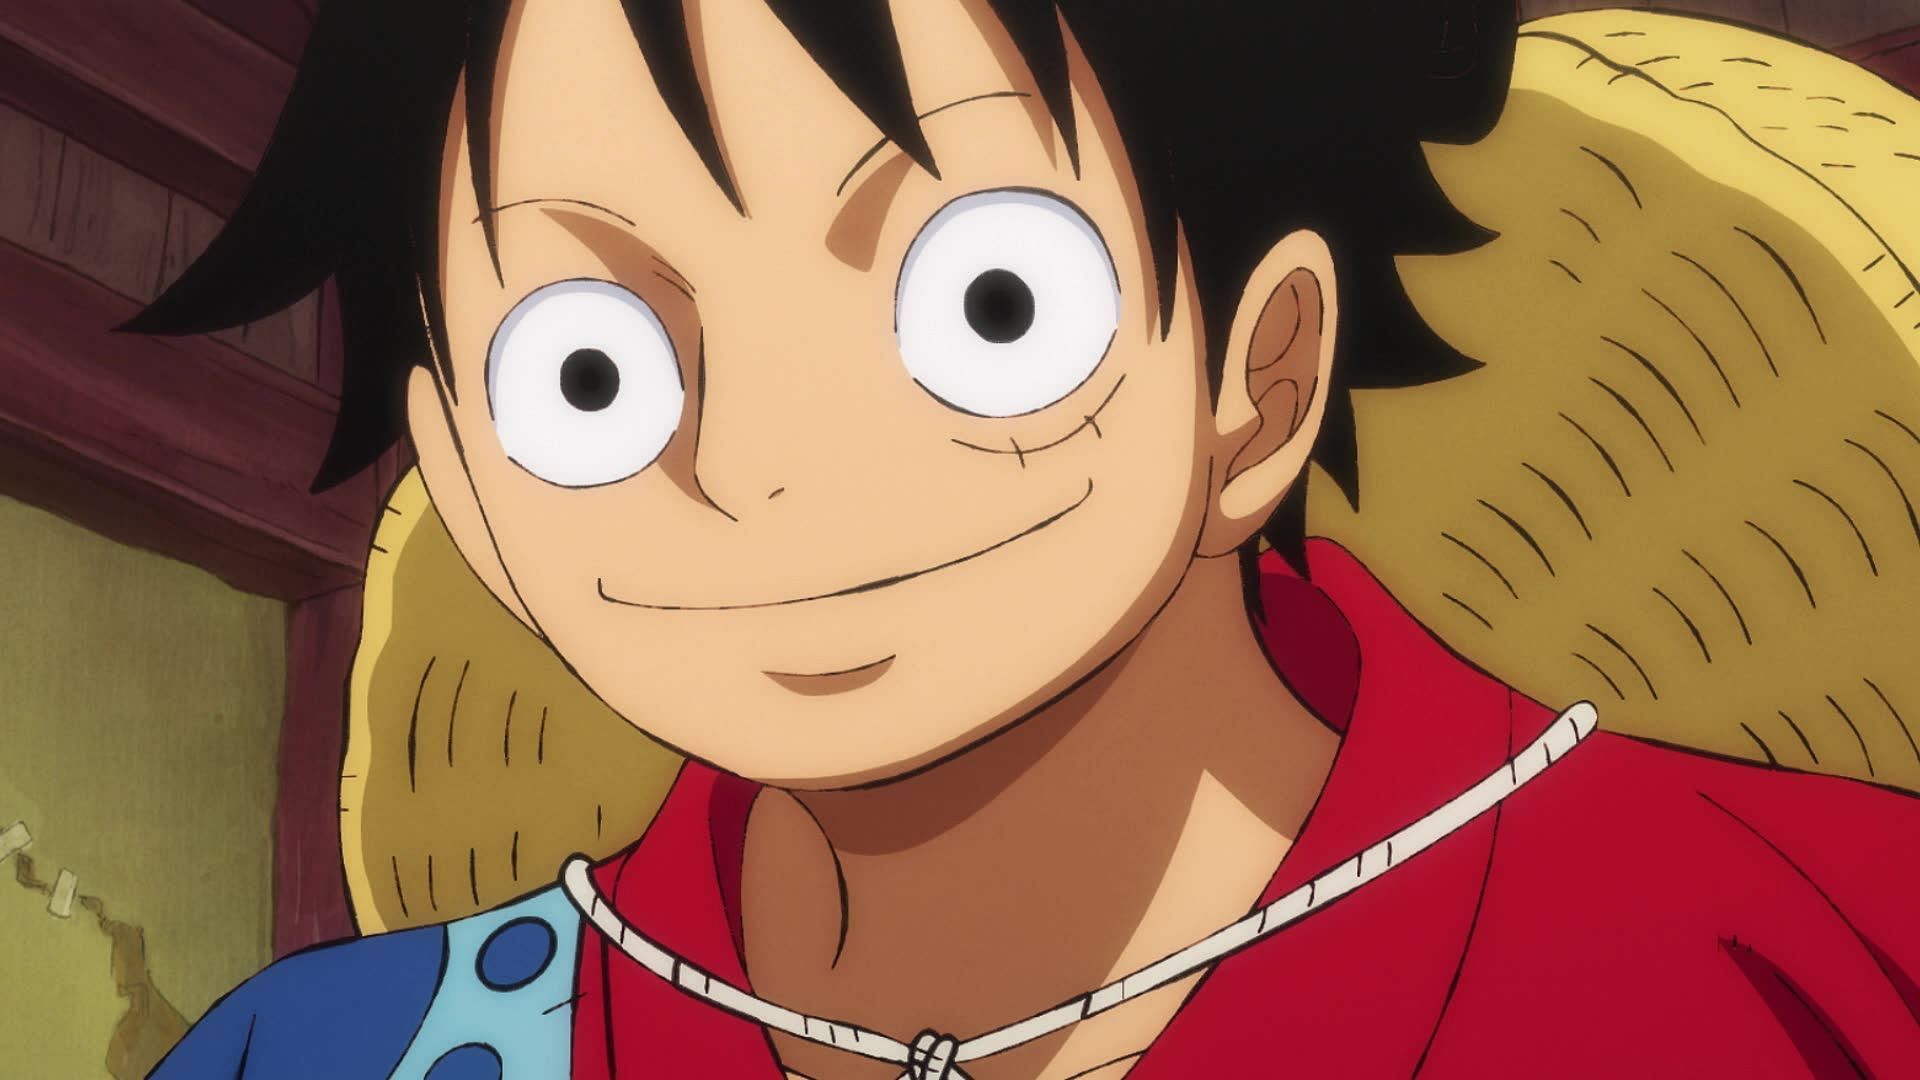 Luffy has stressed his body a lot, but that doesn't necessarily mean he will die (Image via Toei Animation, One Piece)